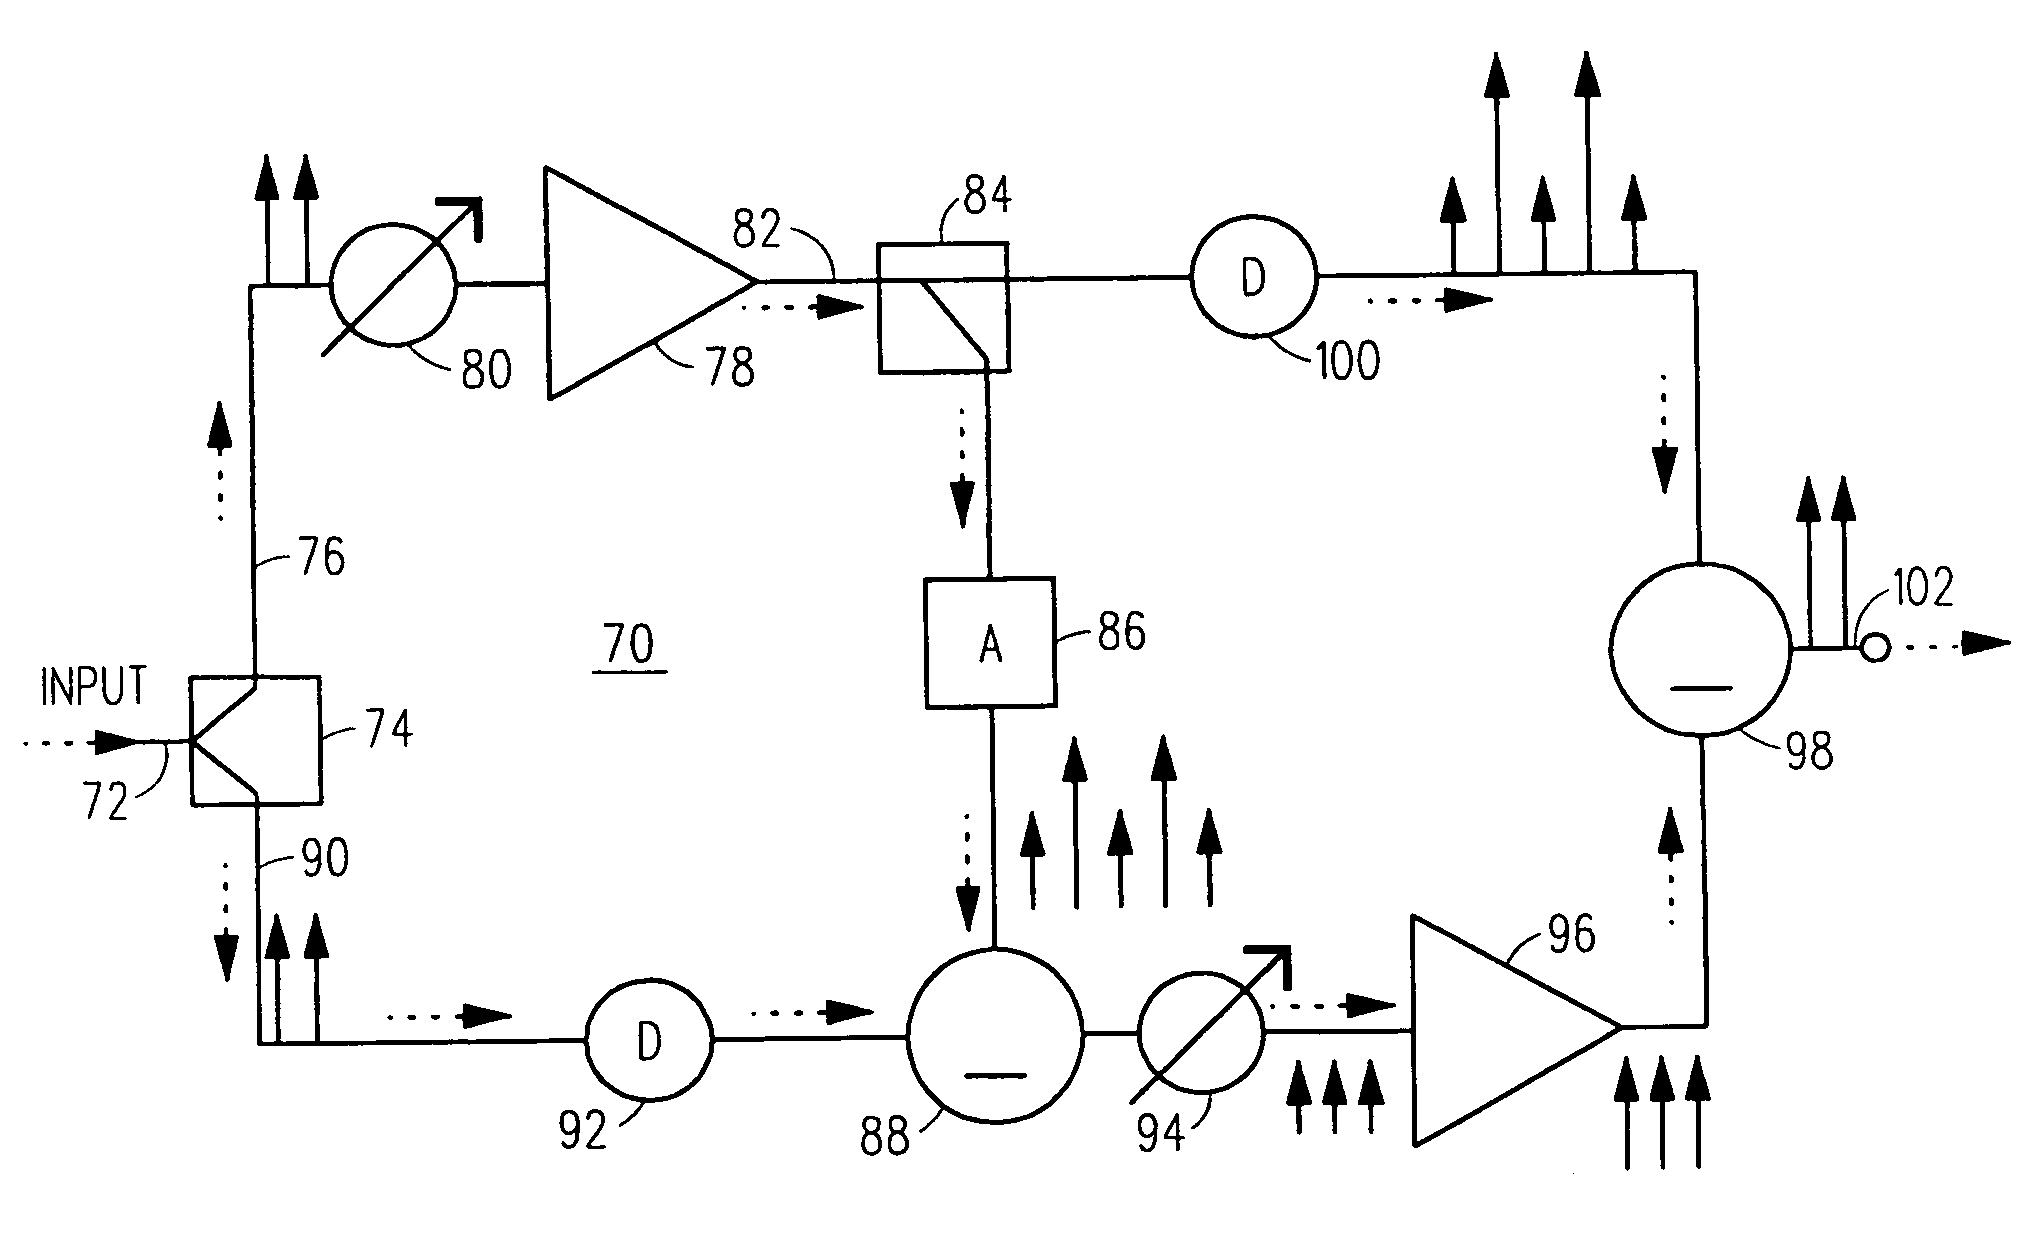 Tunable filters having variable bandwidth and variable delay